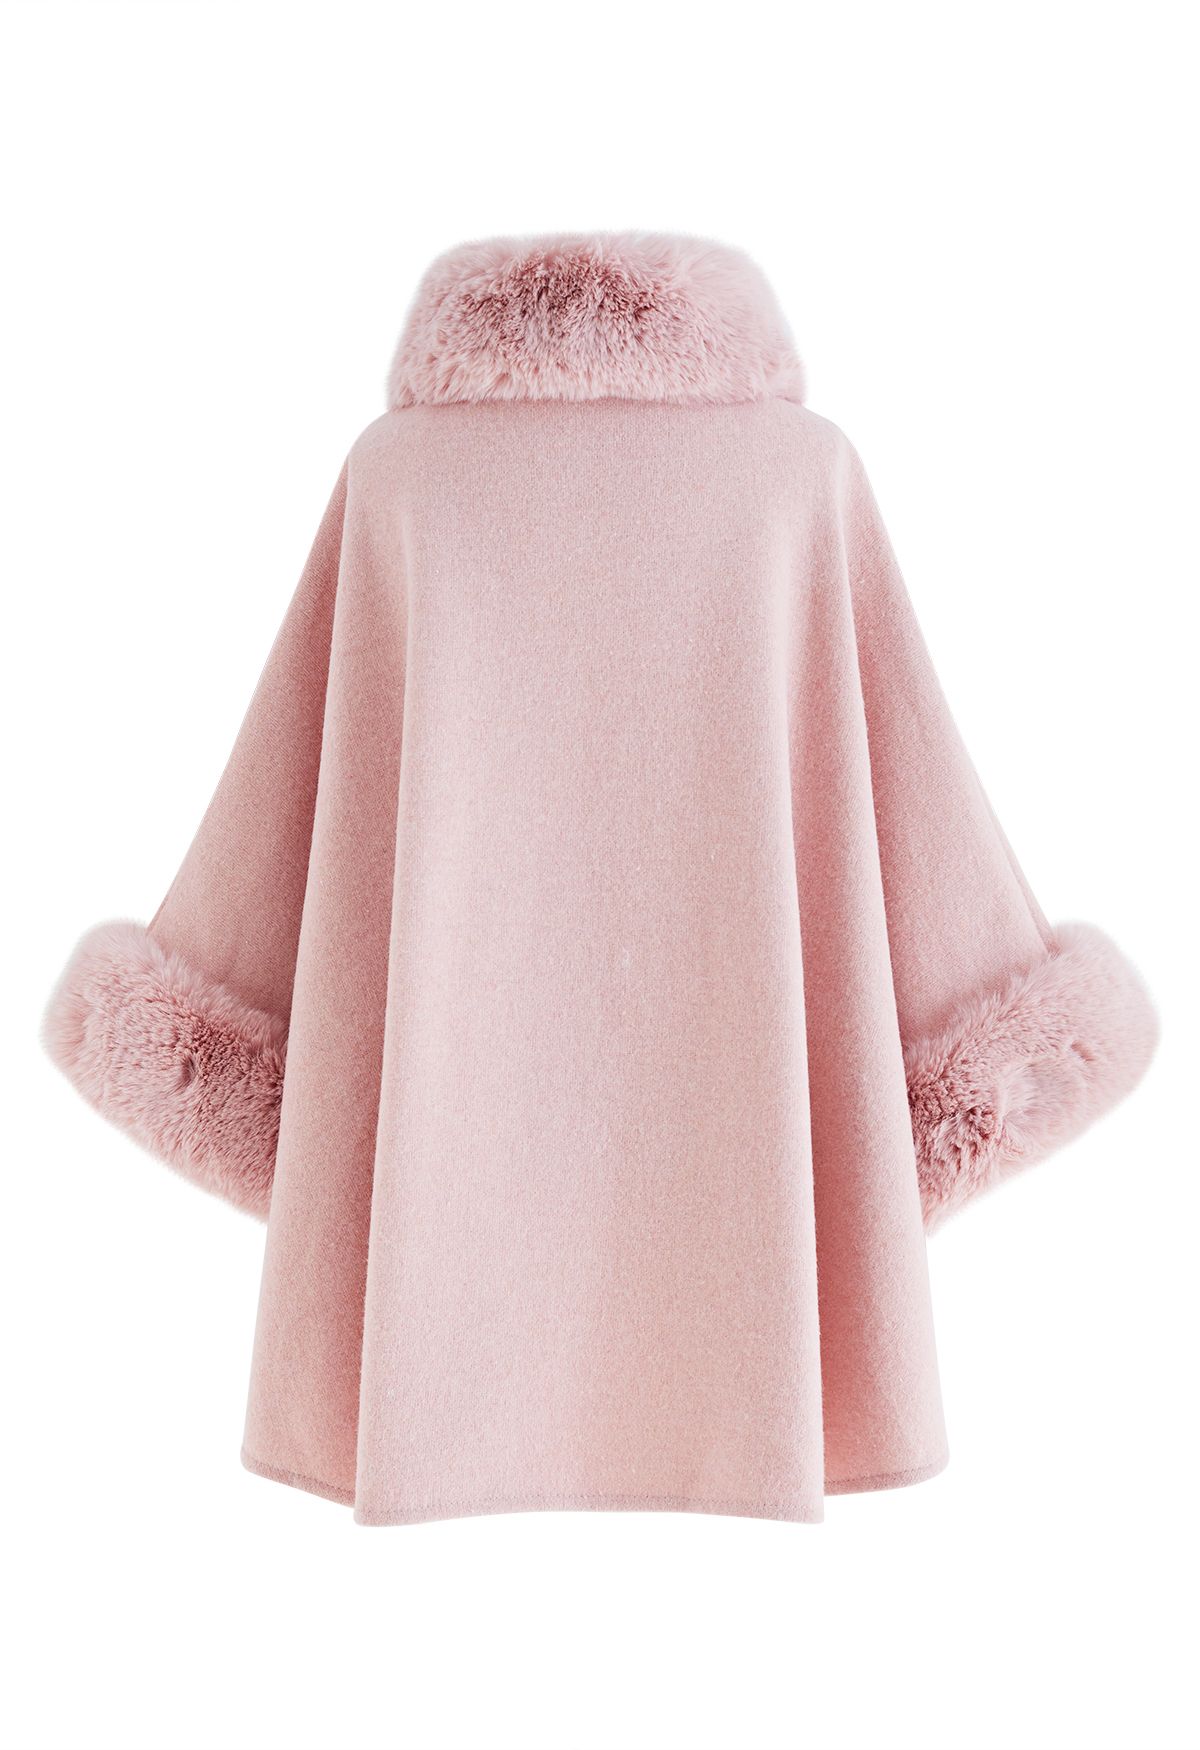 Self-Tie Bowknot Faux Fur Poncho in Pink